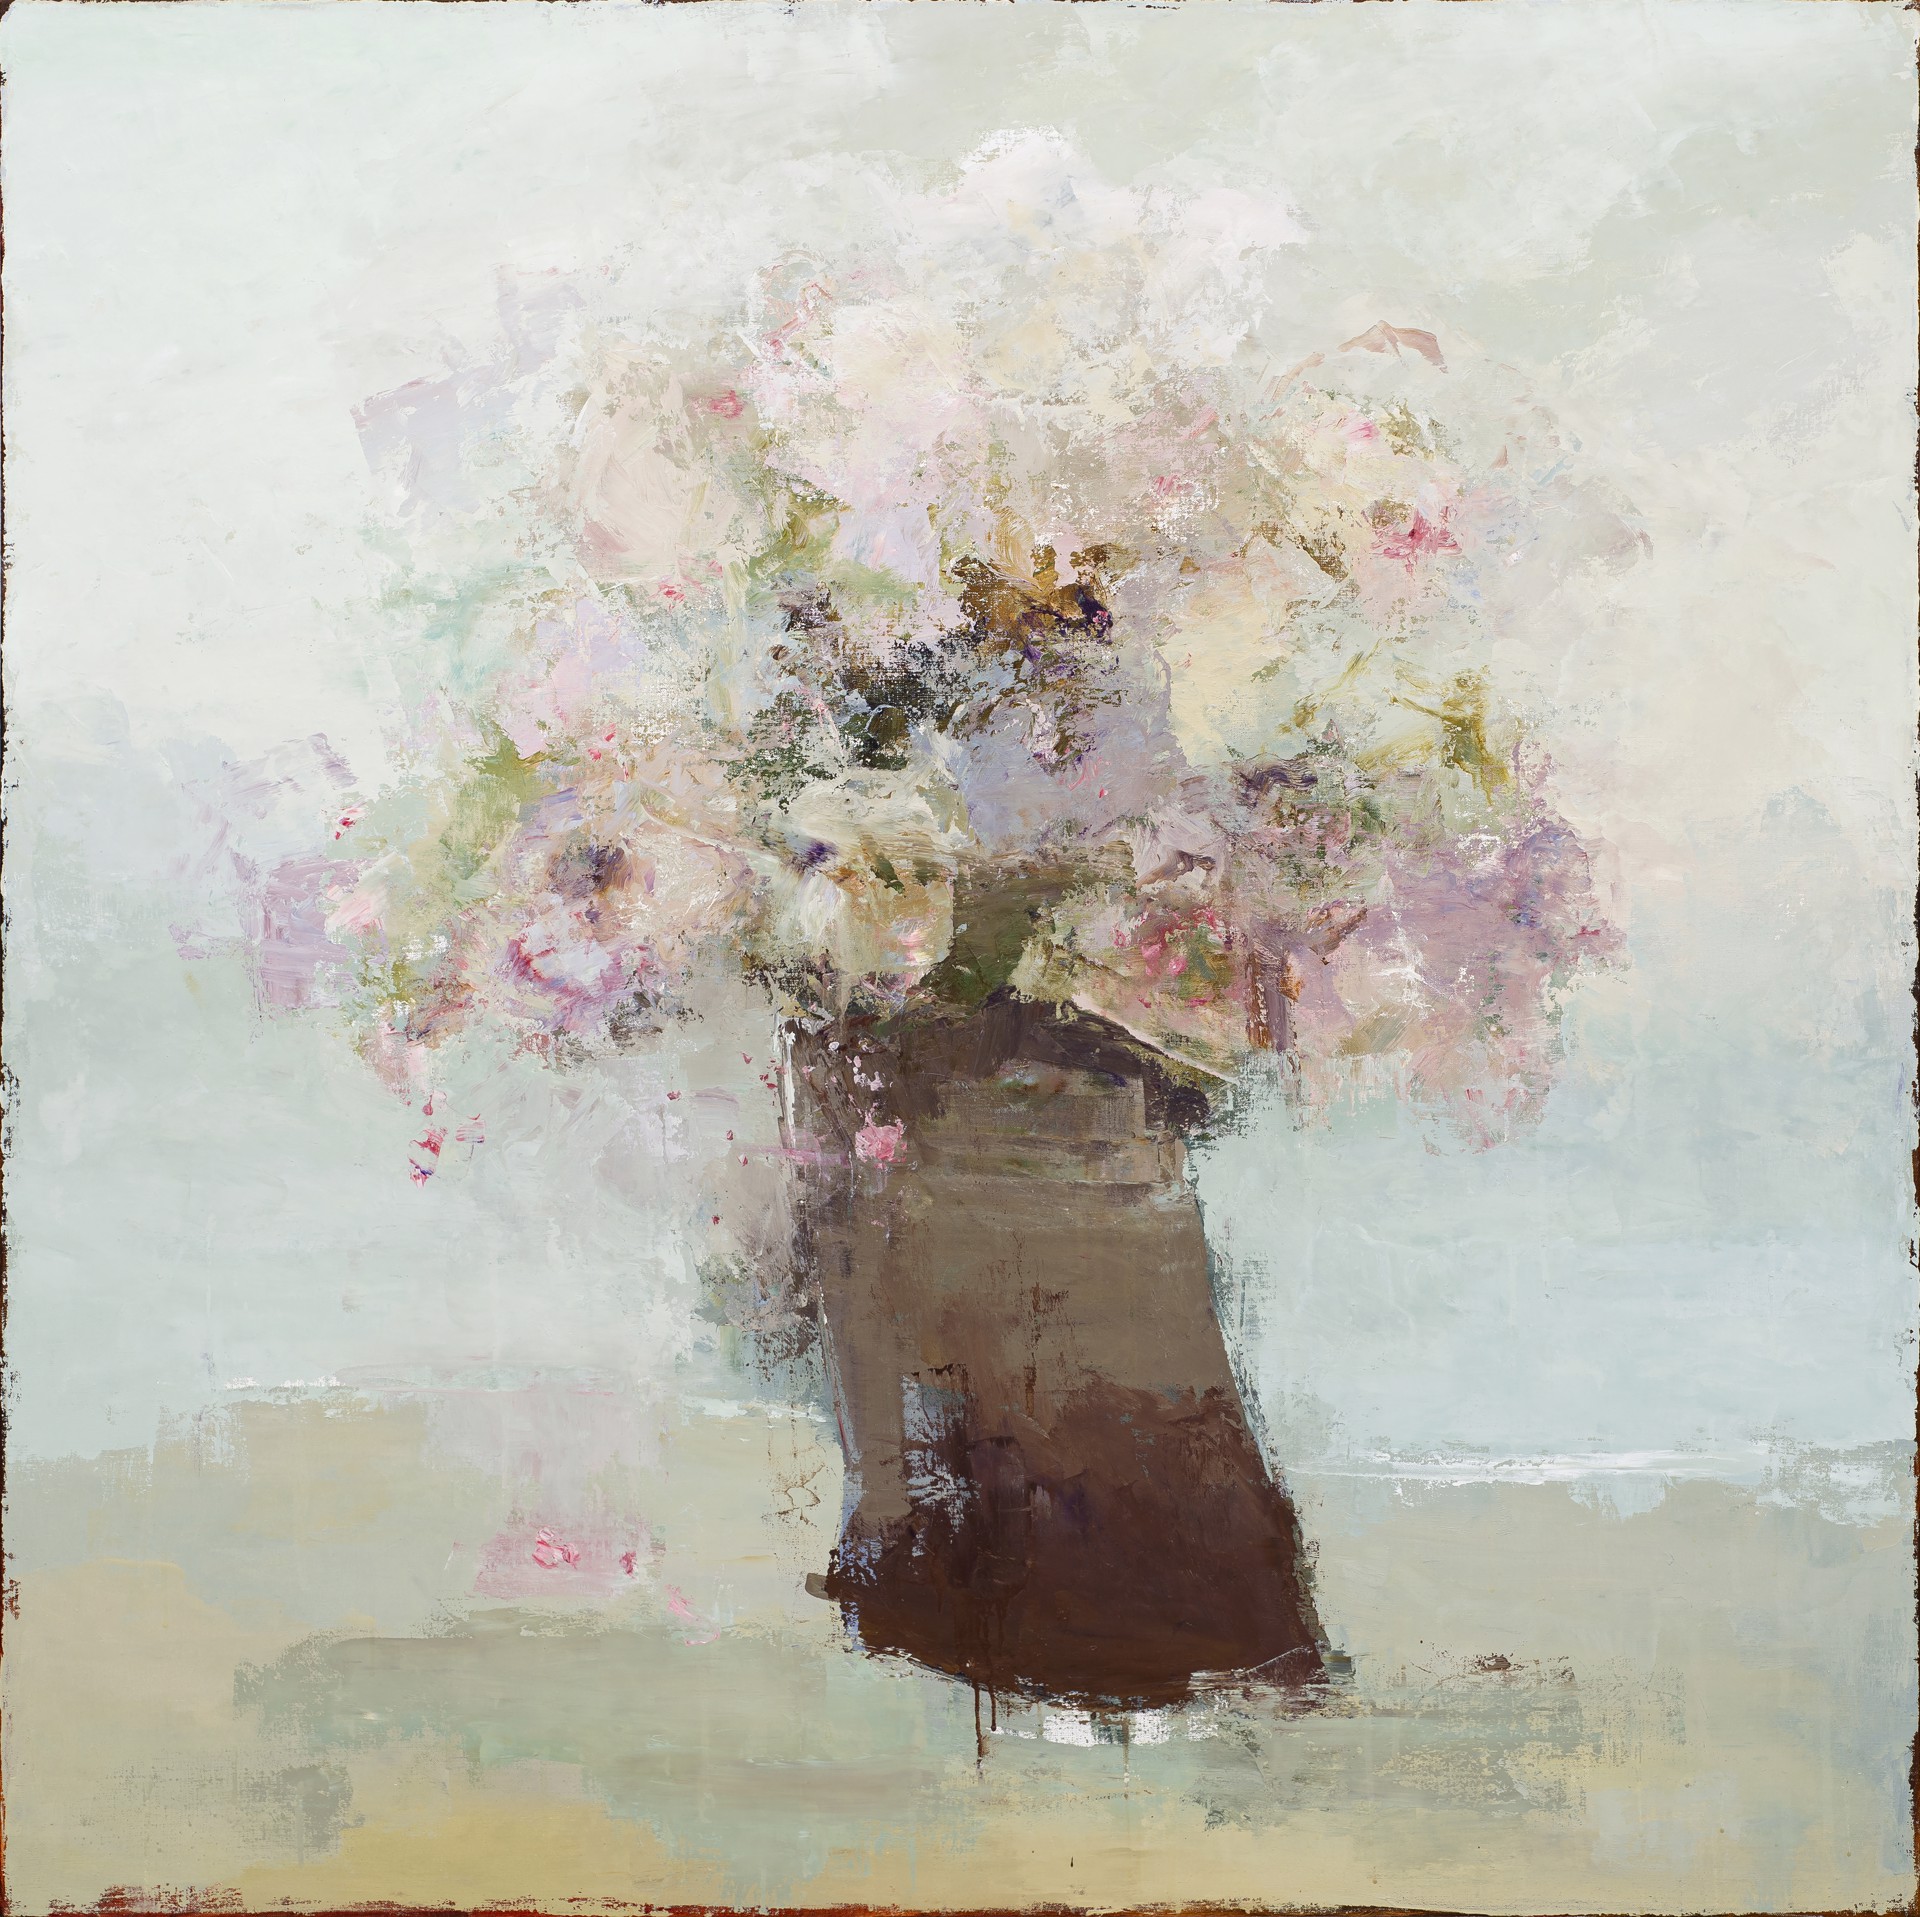 The budding flower blushes at the light by France Jodoin